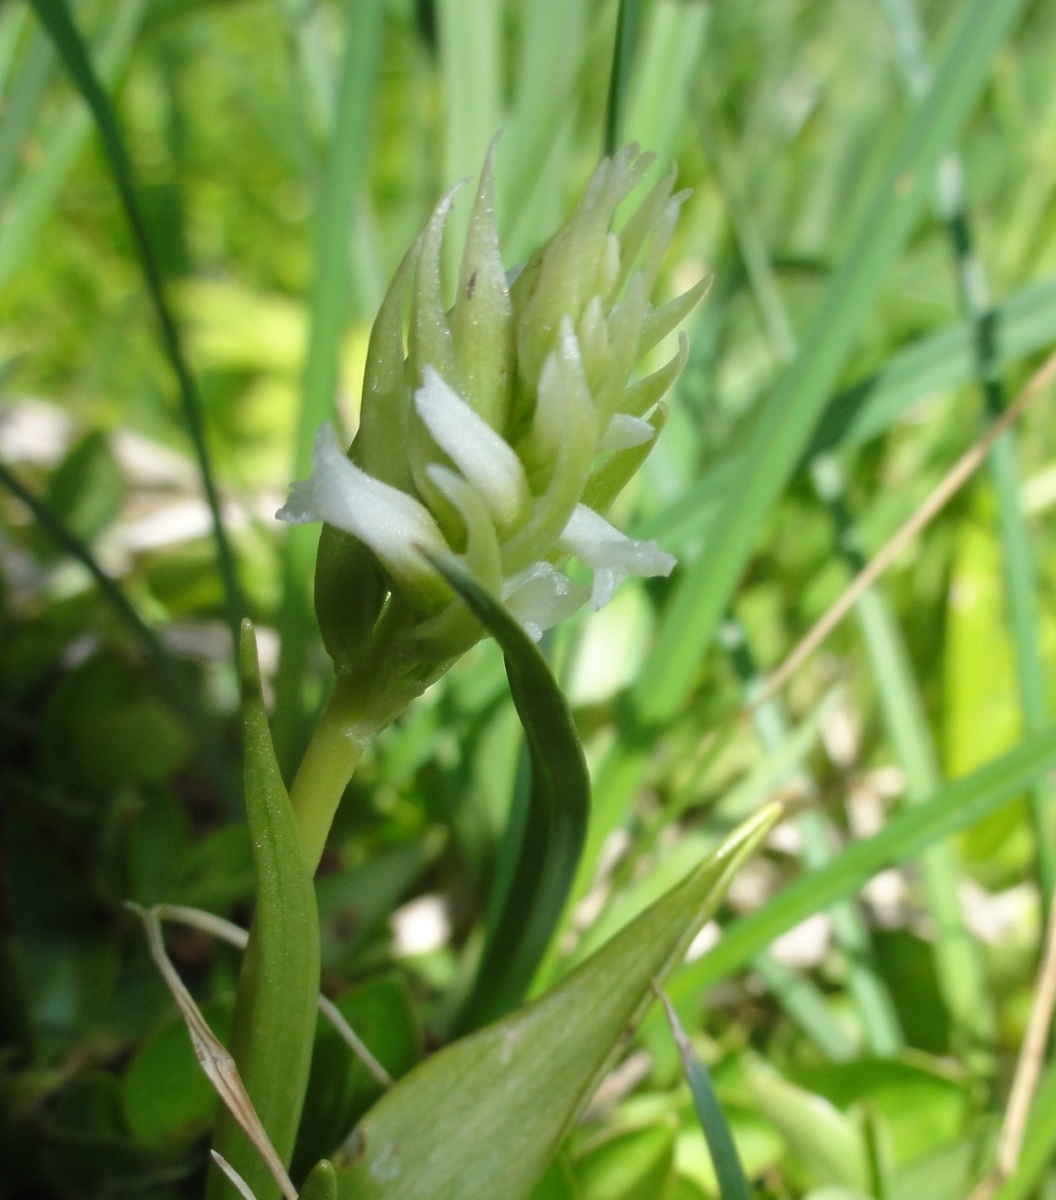 A close-up of a pale white flower in a grassy meadow.